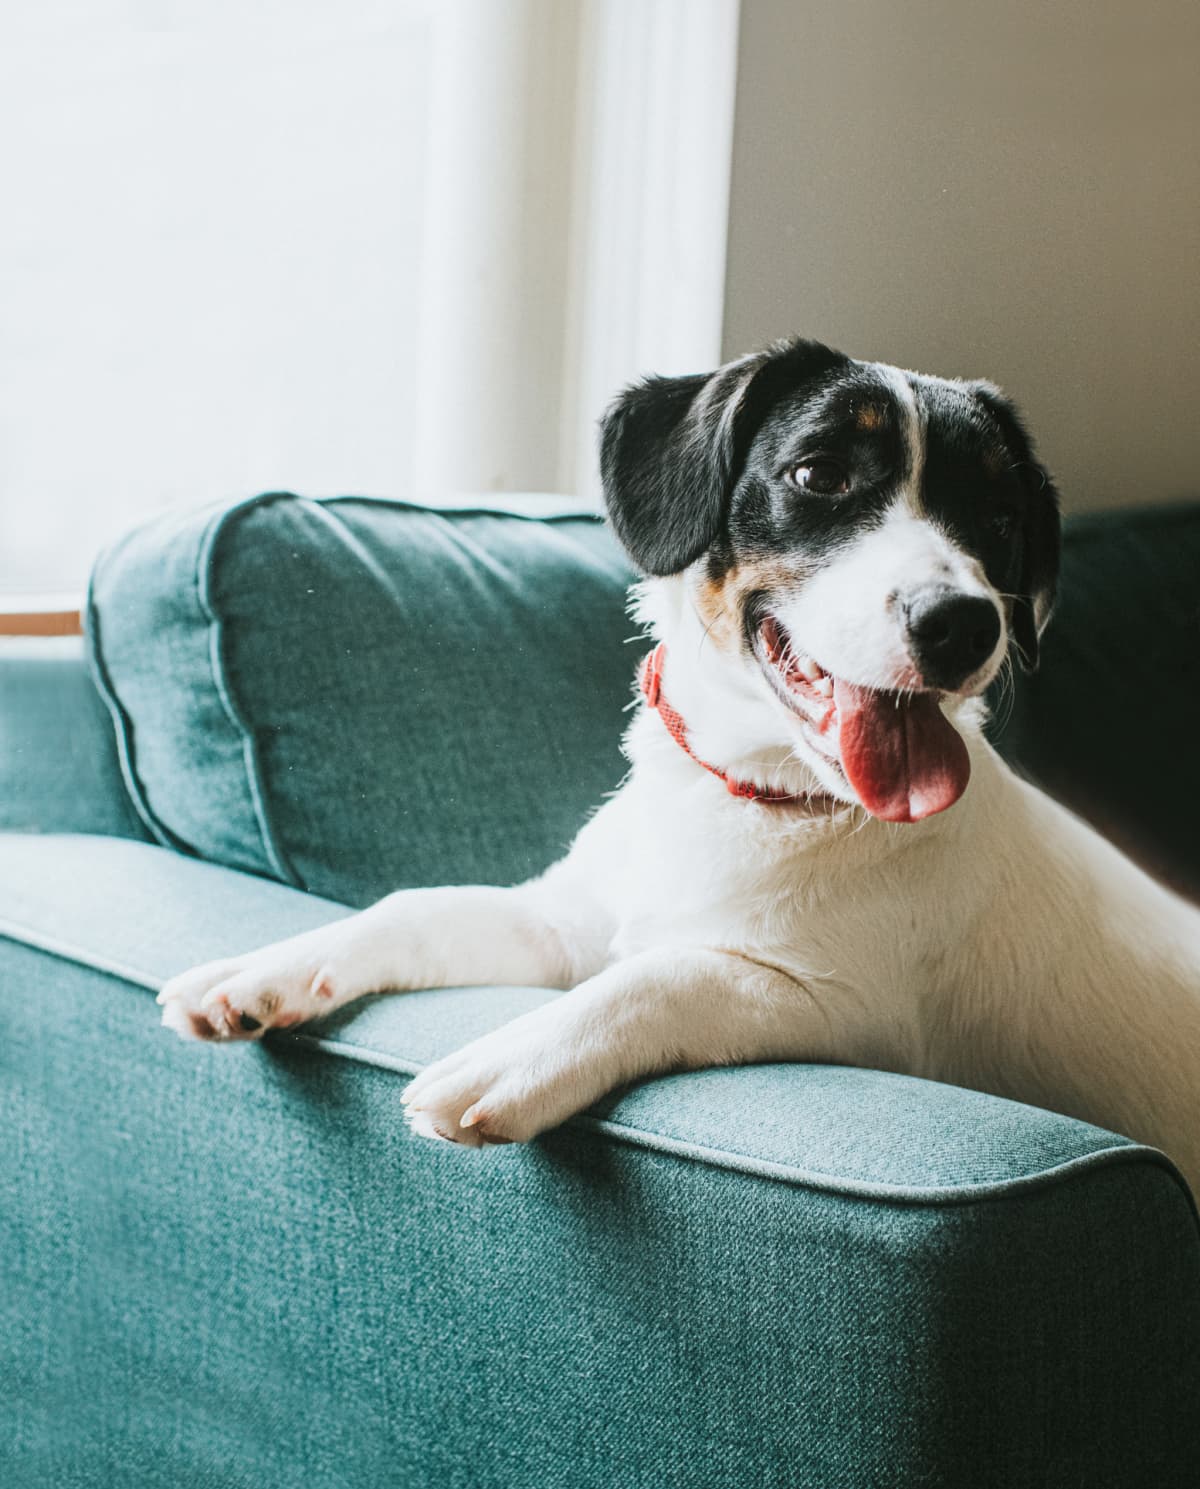 Cute young black and white dog sits on a comfortable blue sofa in front of a window. He hangs his paws over the arm of the chair and looks away from the camera. His tongue is hanging out and he looks happy and content.